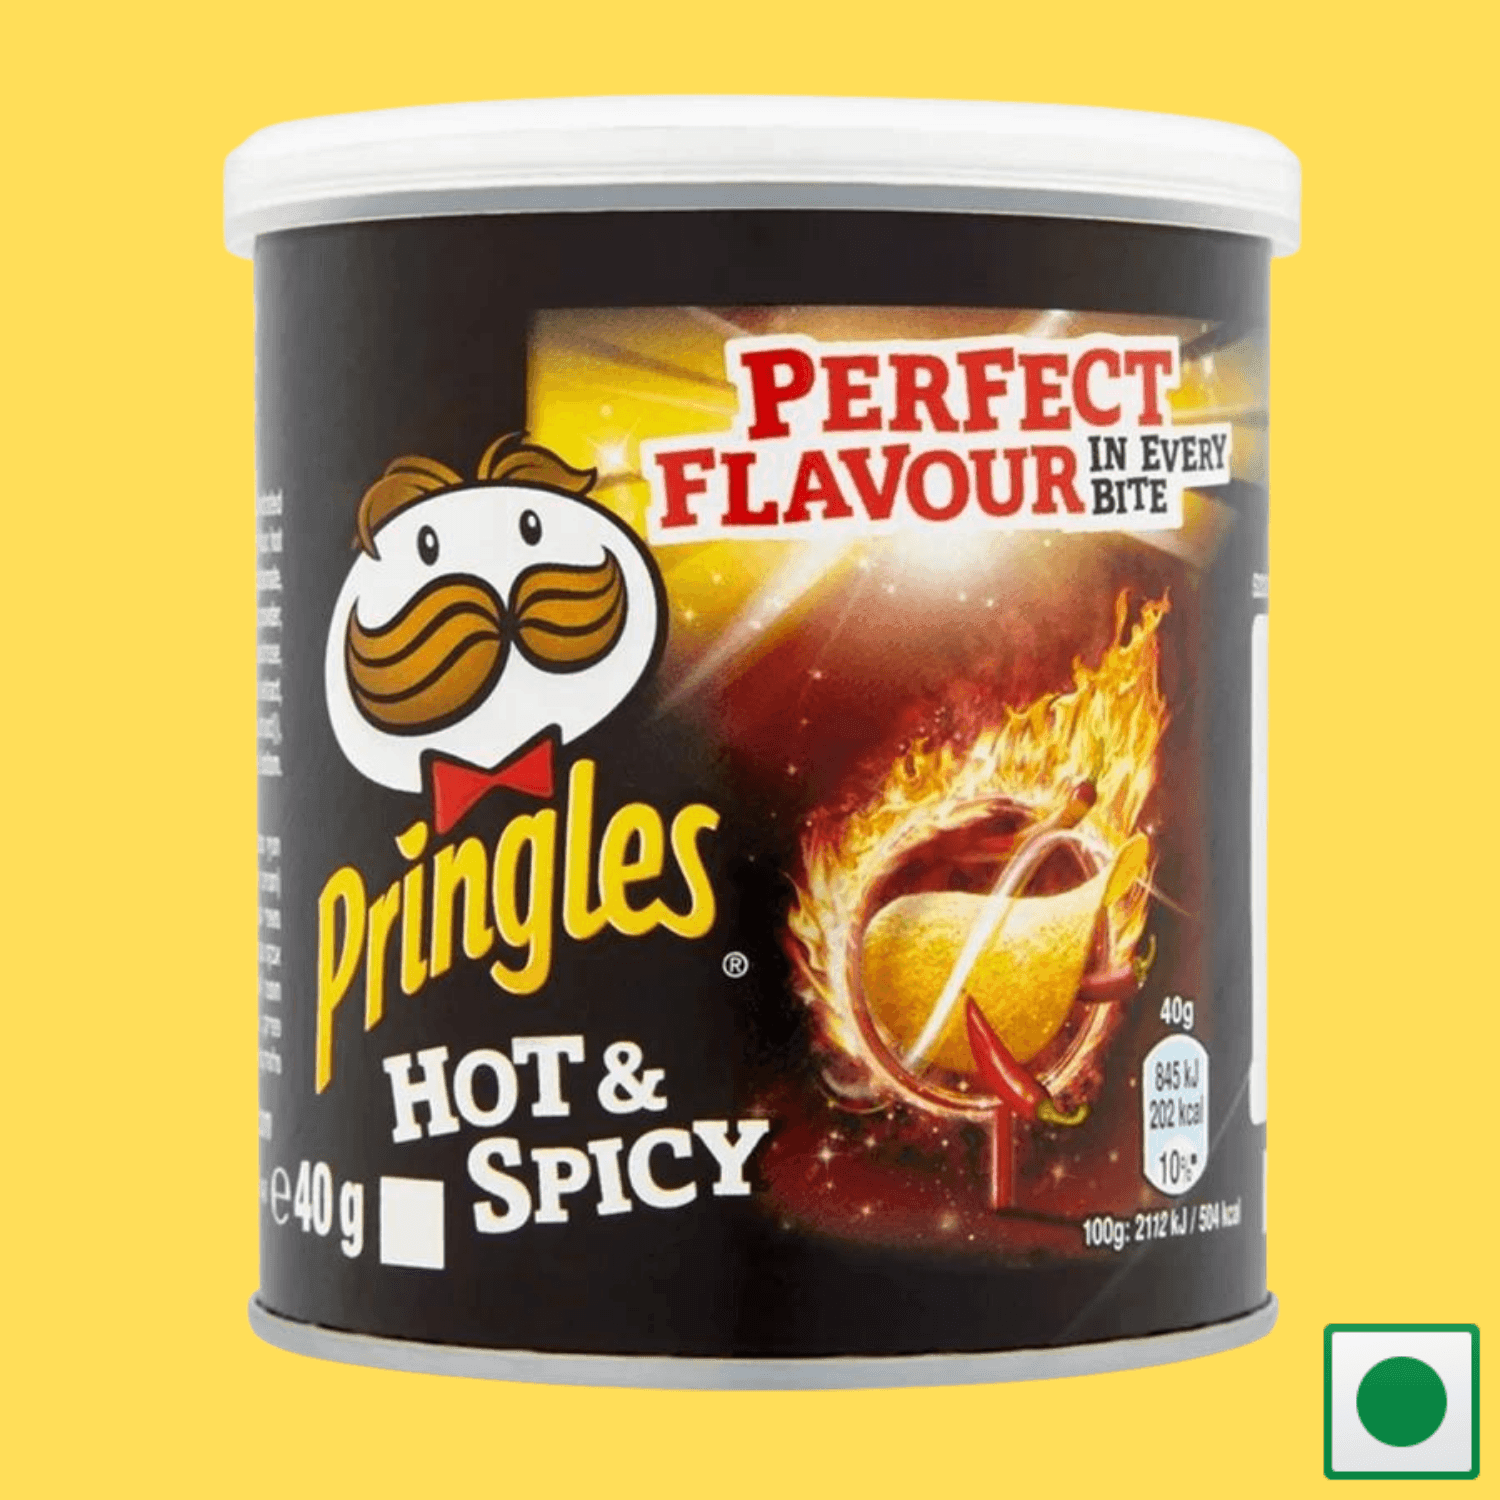 Pringles Hot & Spicy, 40g (Imported) - Super 7 Mart